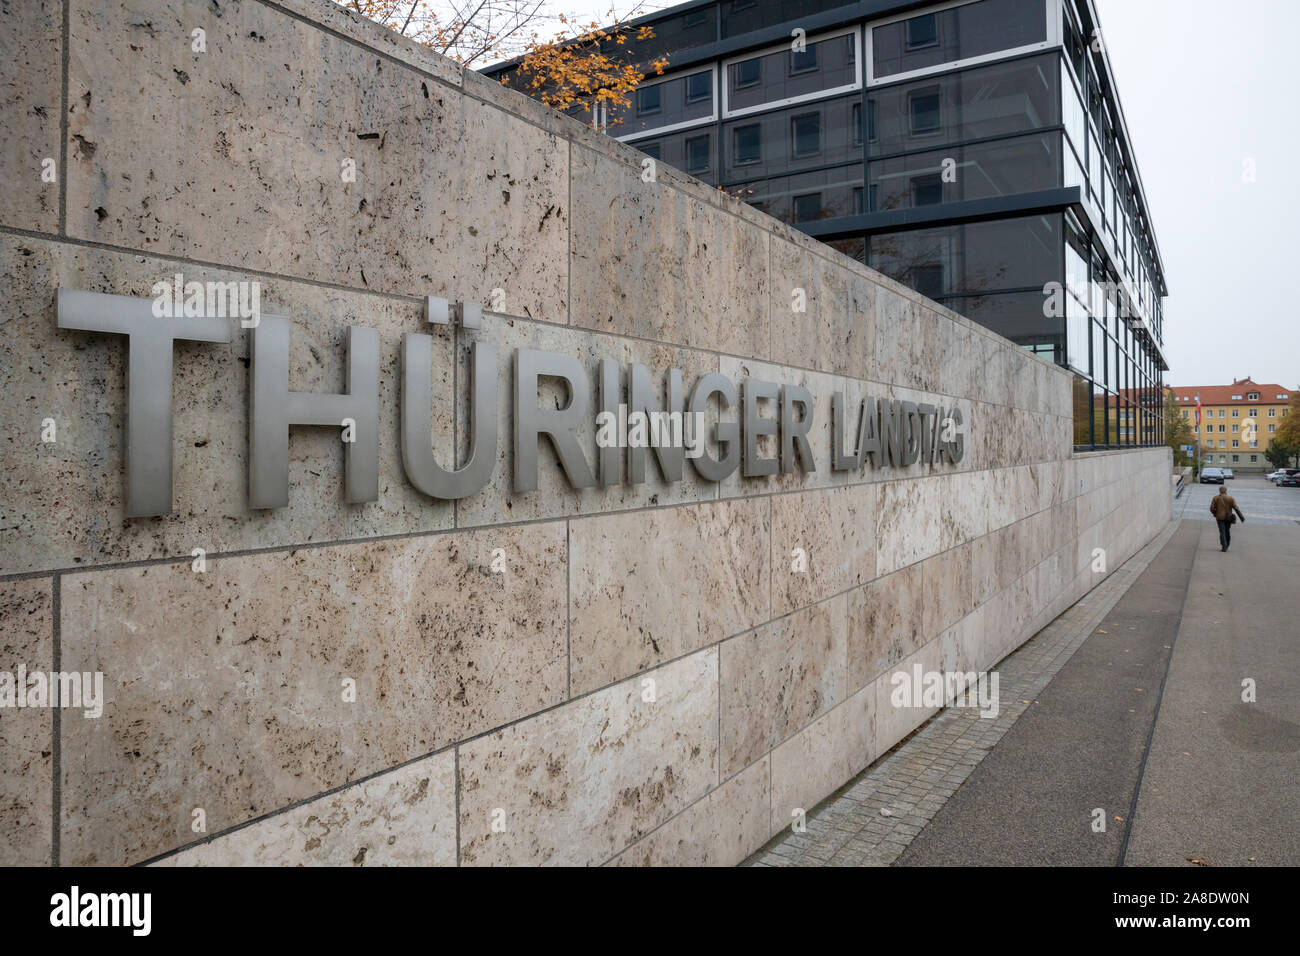 Erfurt, Germany. 08th Nov, 2019. The lettering "Thüringer Landtag" stands  in metal letters on a wall. Thuringia has elected a new state parliament.  Credit: Michael Reichel/dpa/Alamy Live News Stock Photo - Alamy